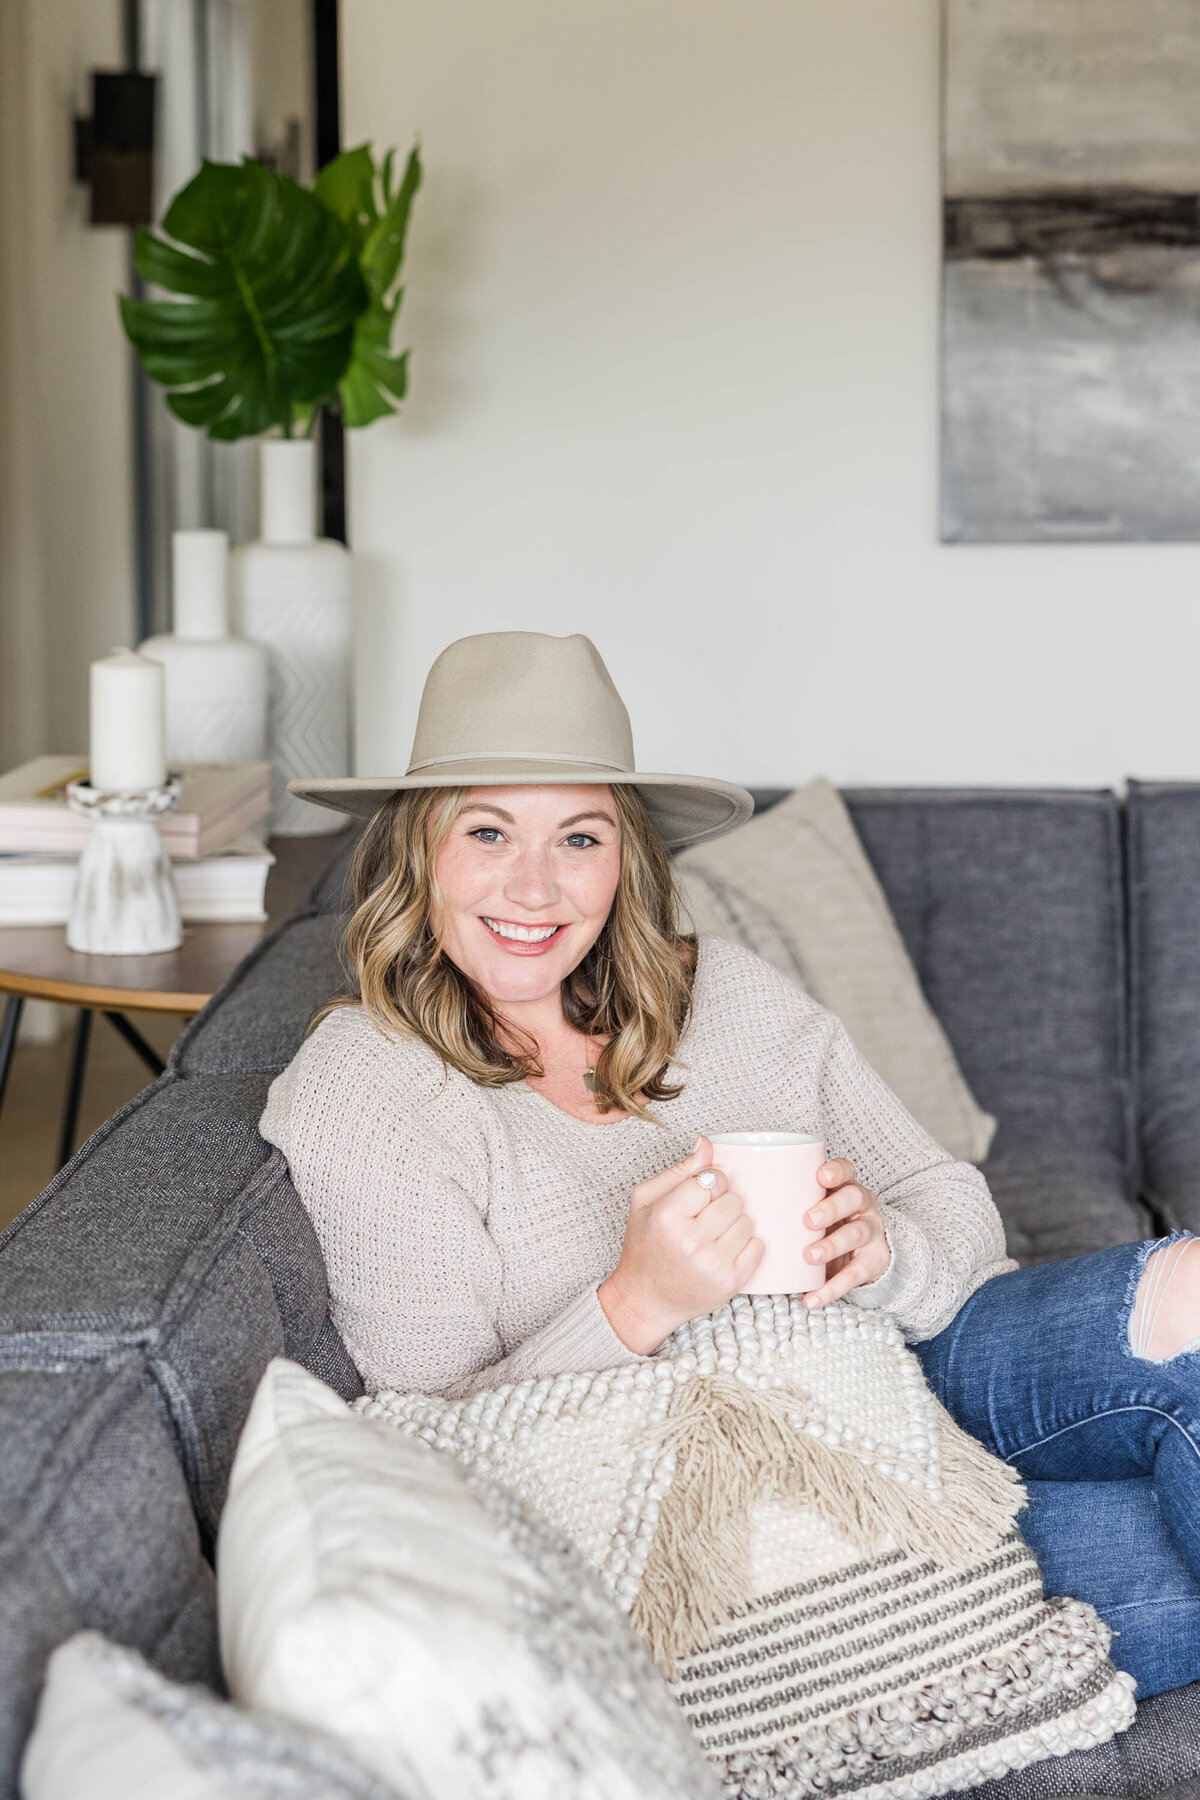 podcast-host-personal-branding-photography-on-couch-with-coffee